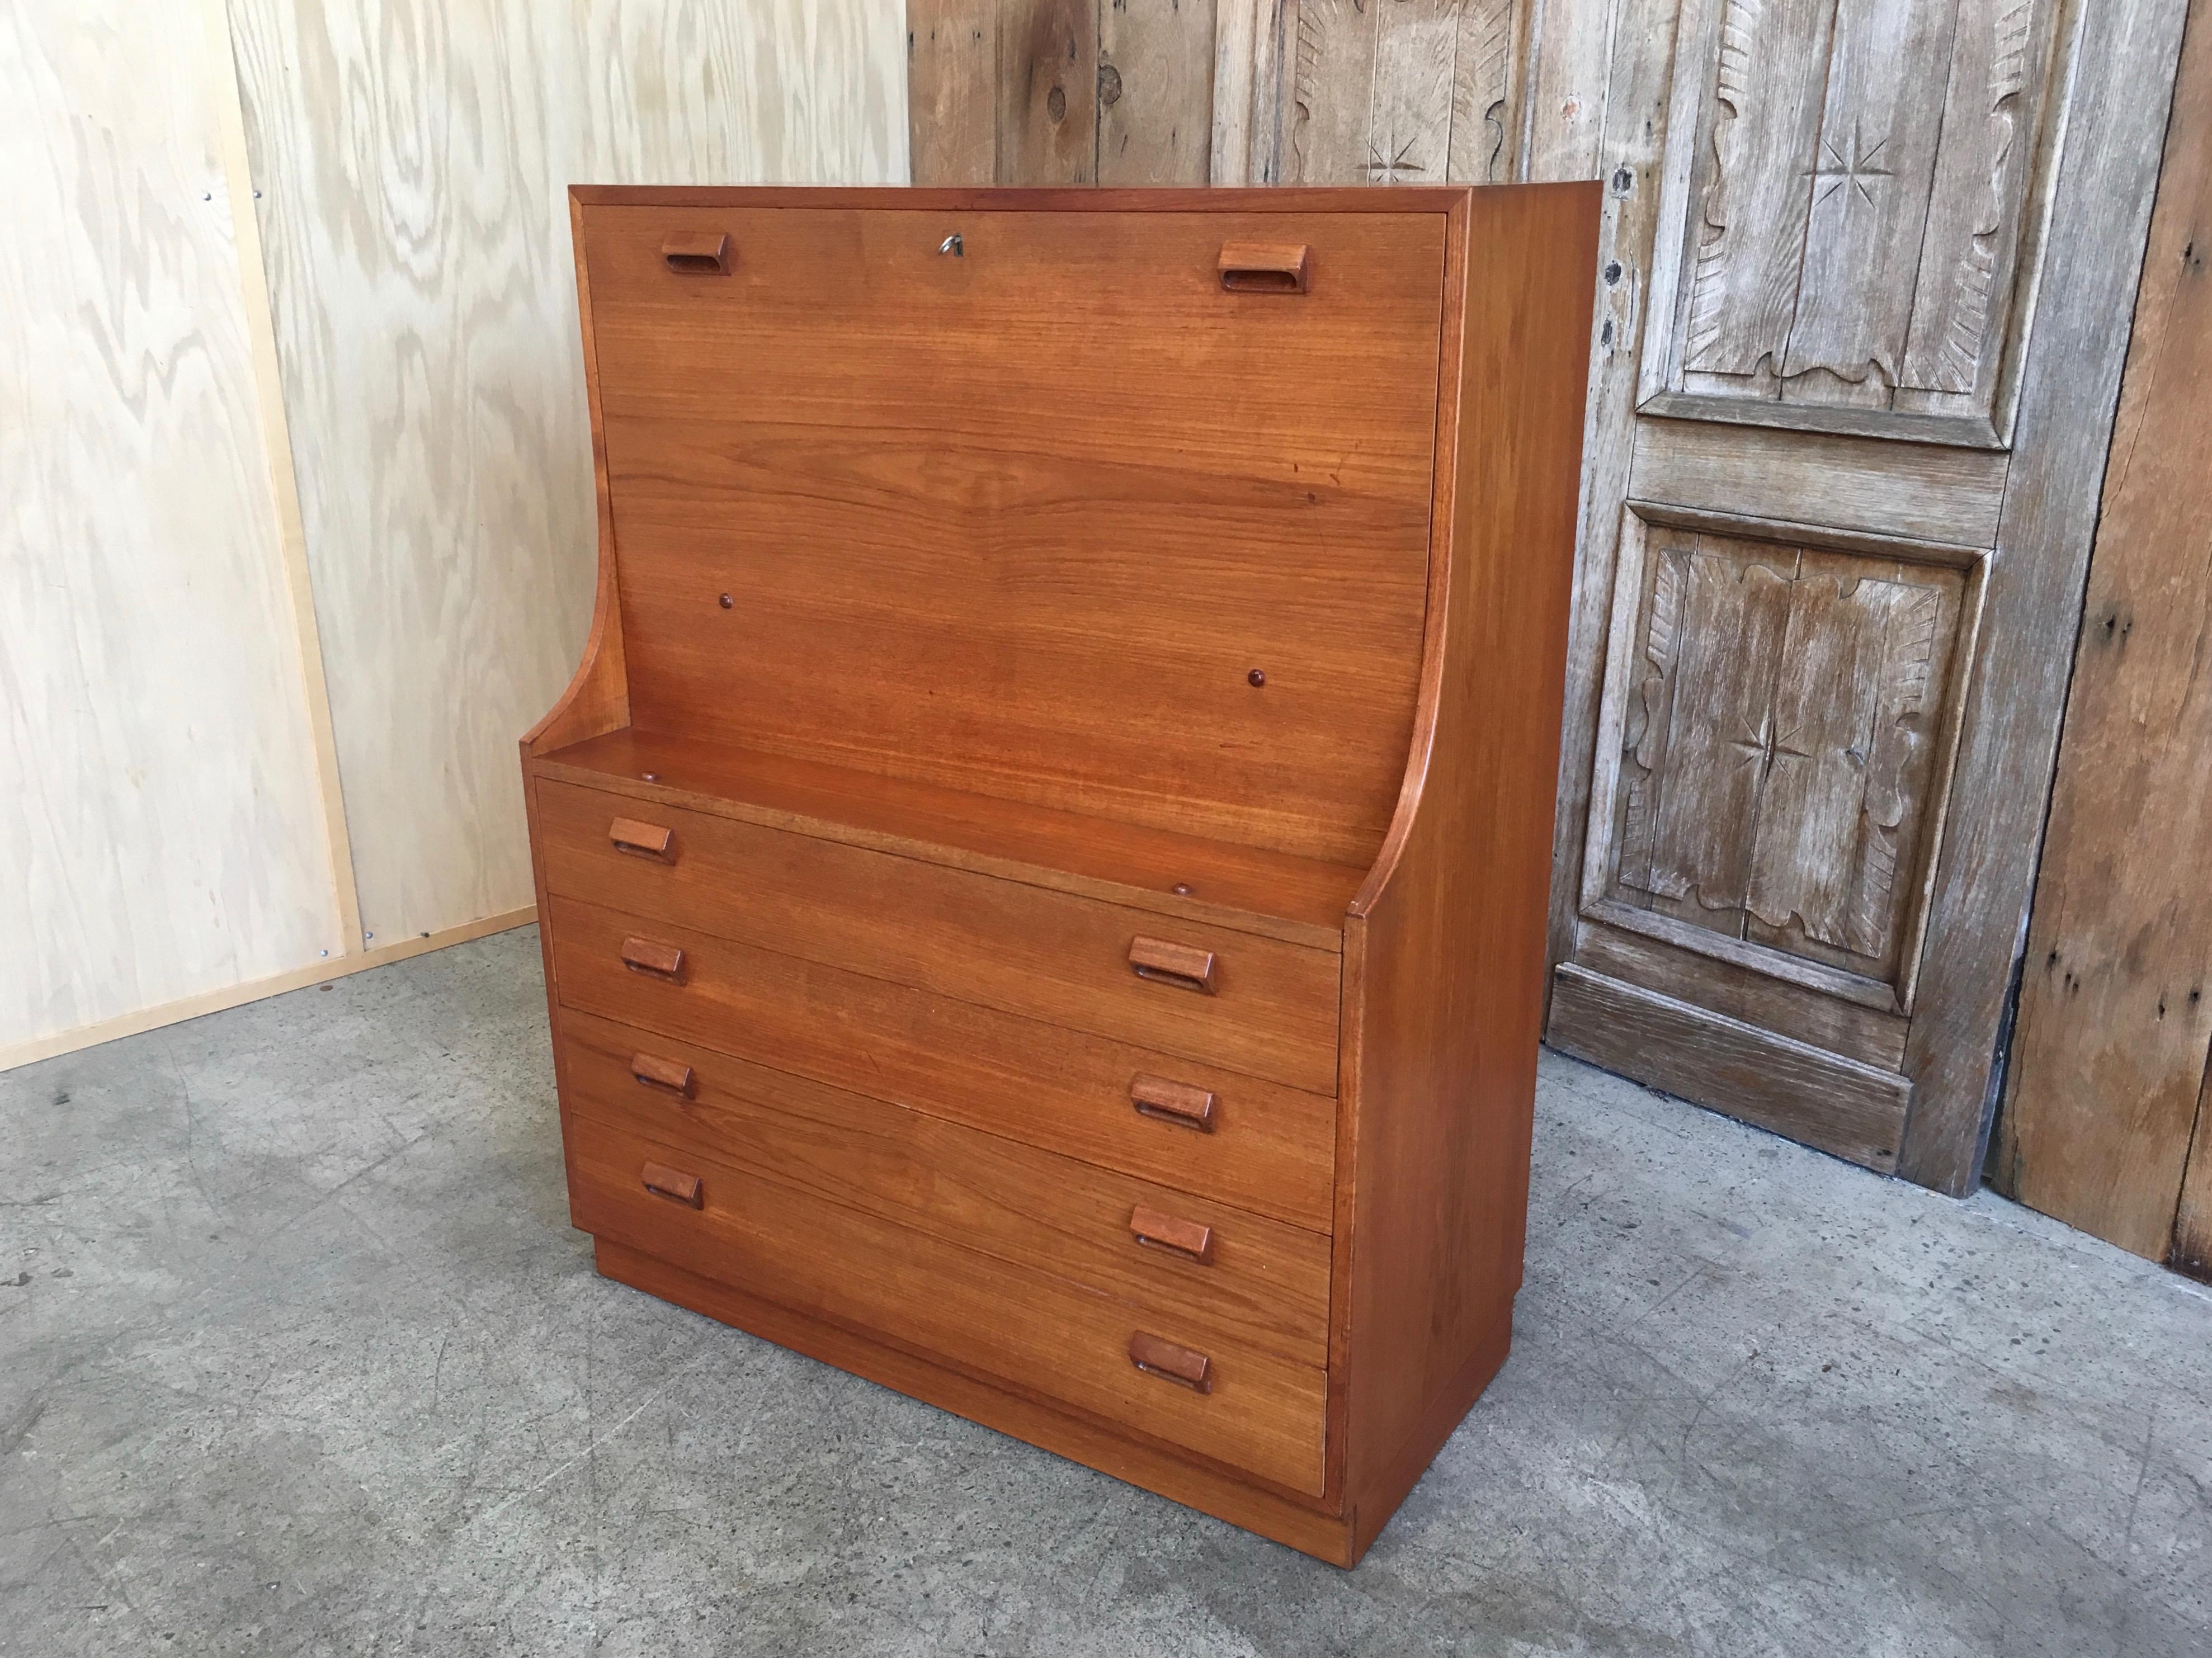 Beautiful Danish Modern upright cabinet that also serves as a desk
Height of desk top 27.25